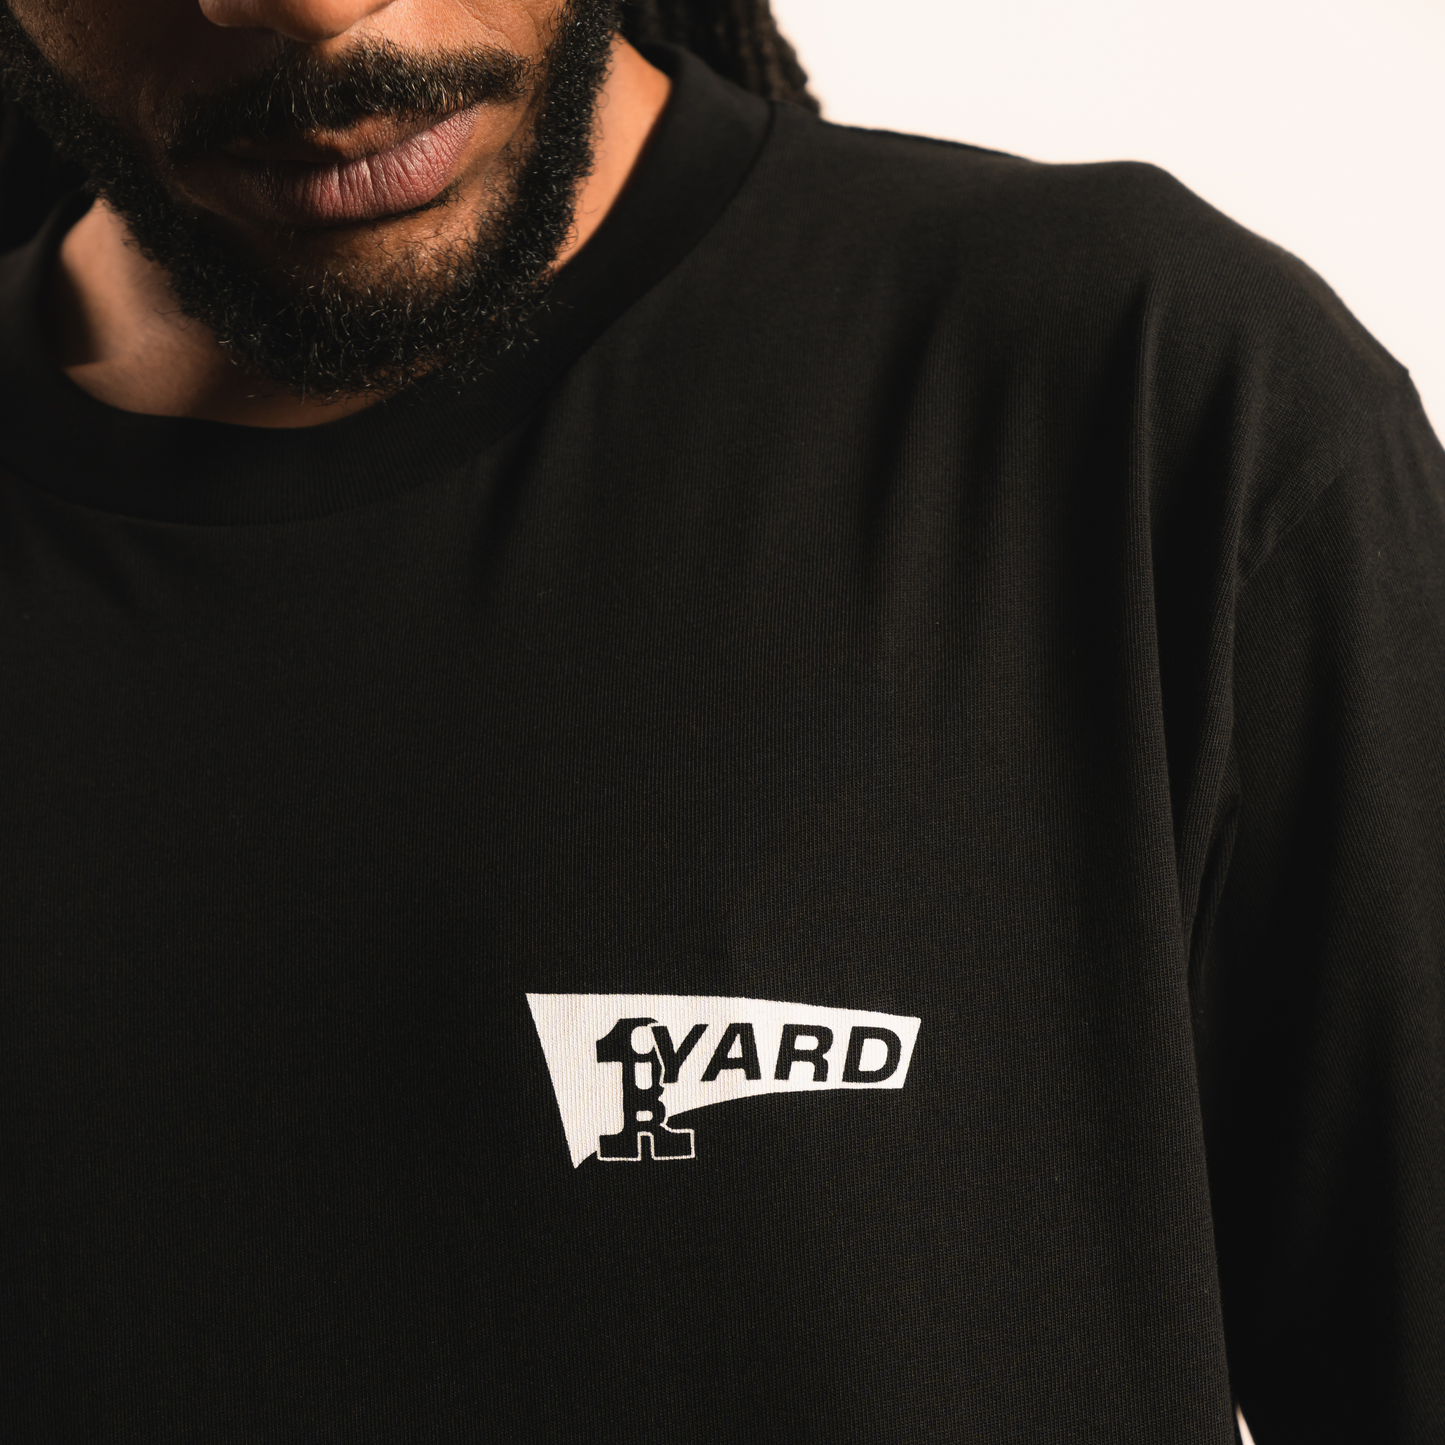 Our Yard - Studio One T-Shirt